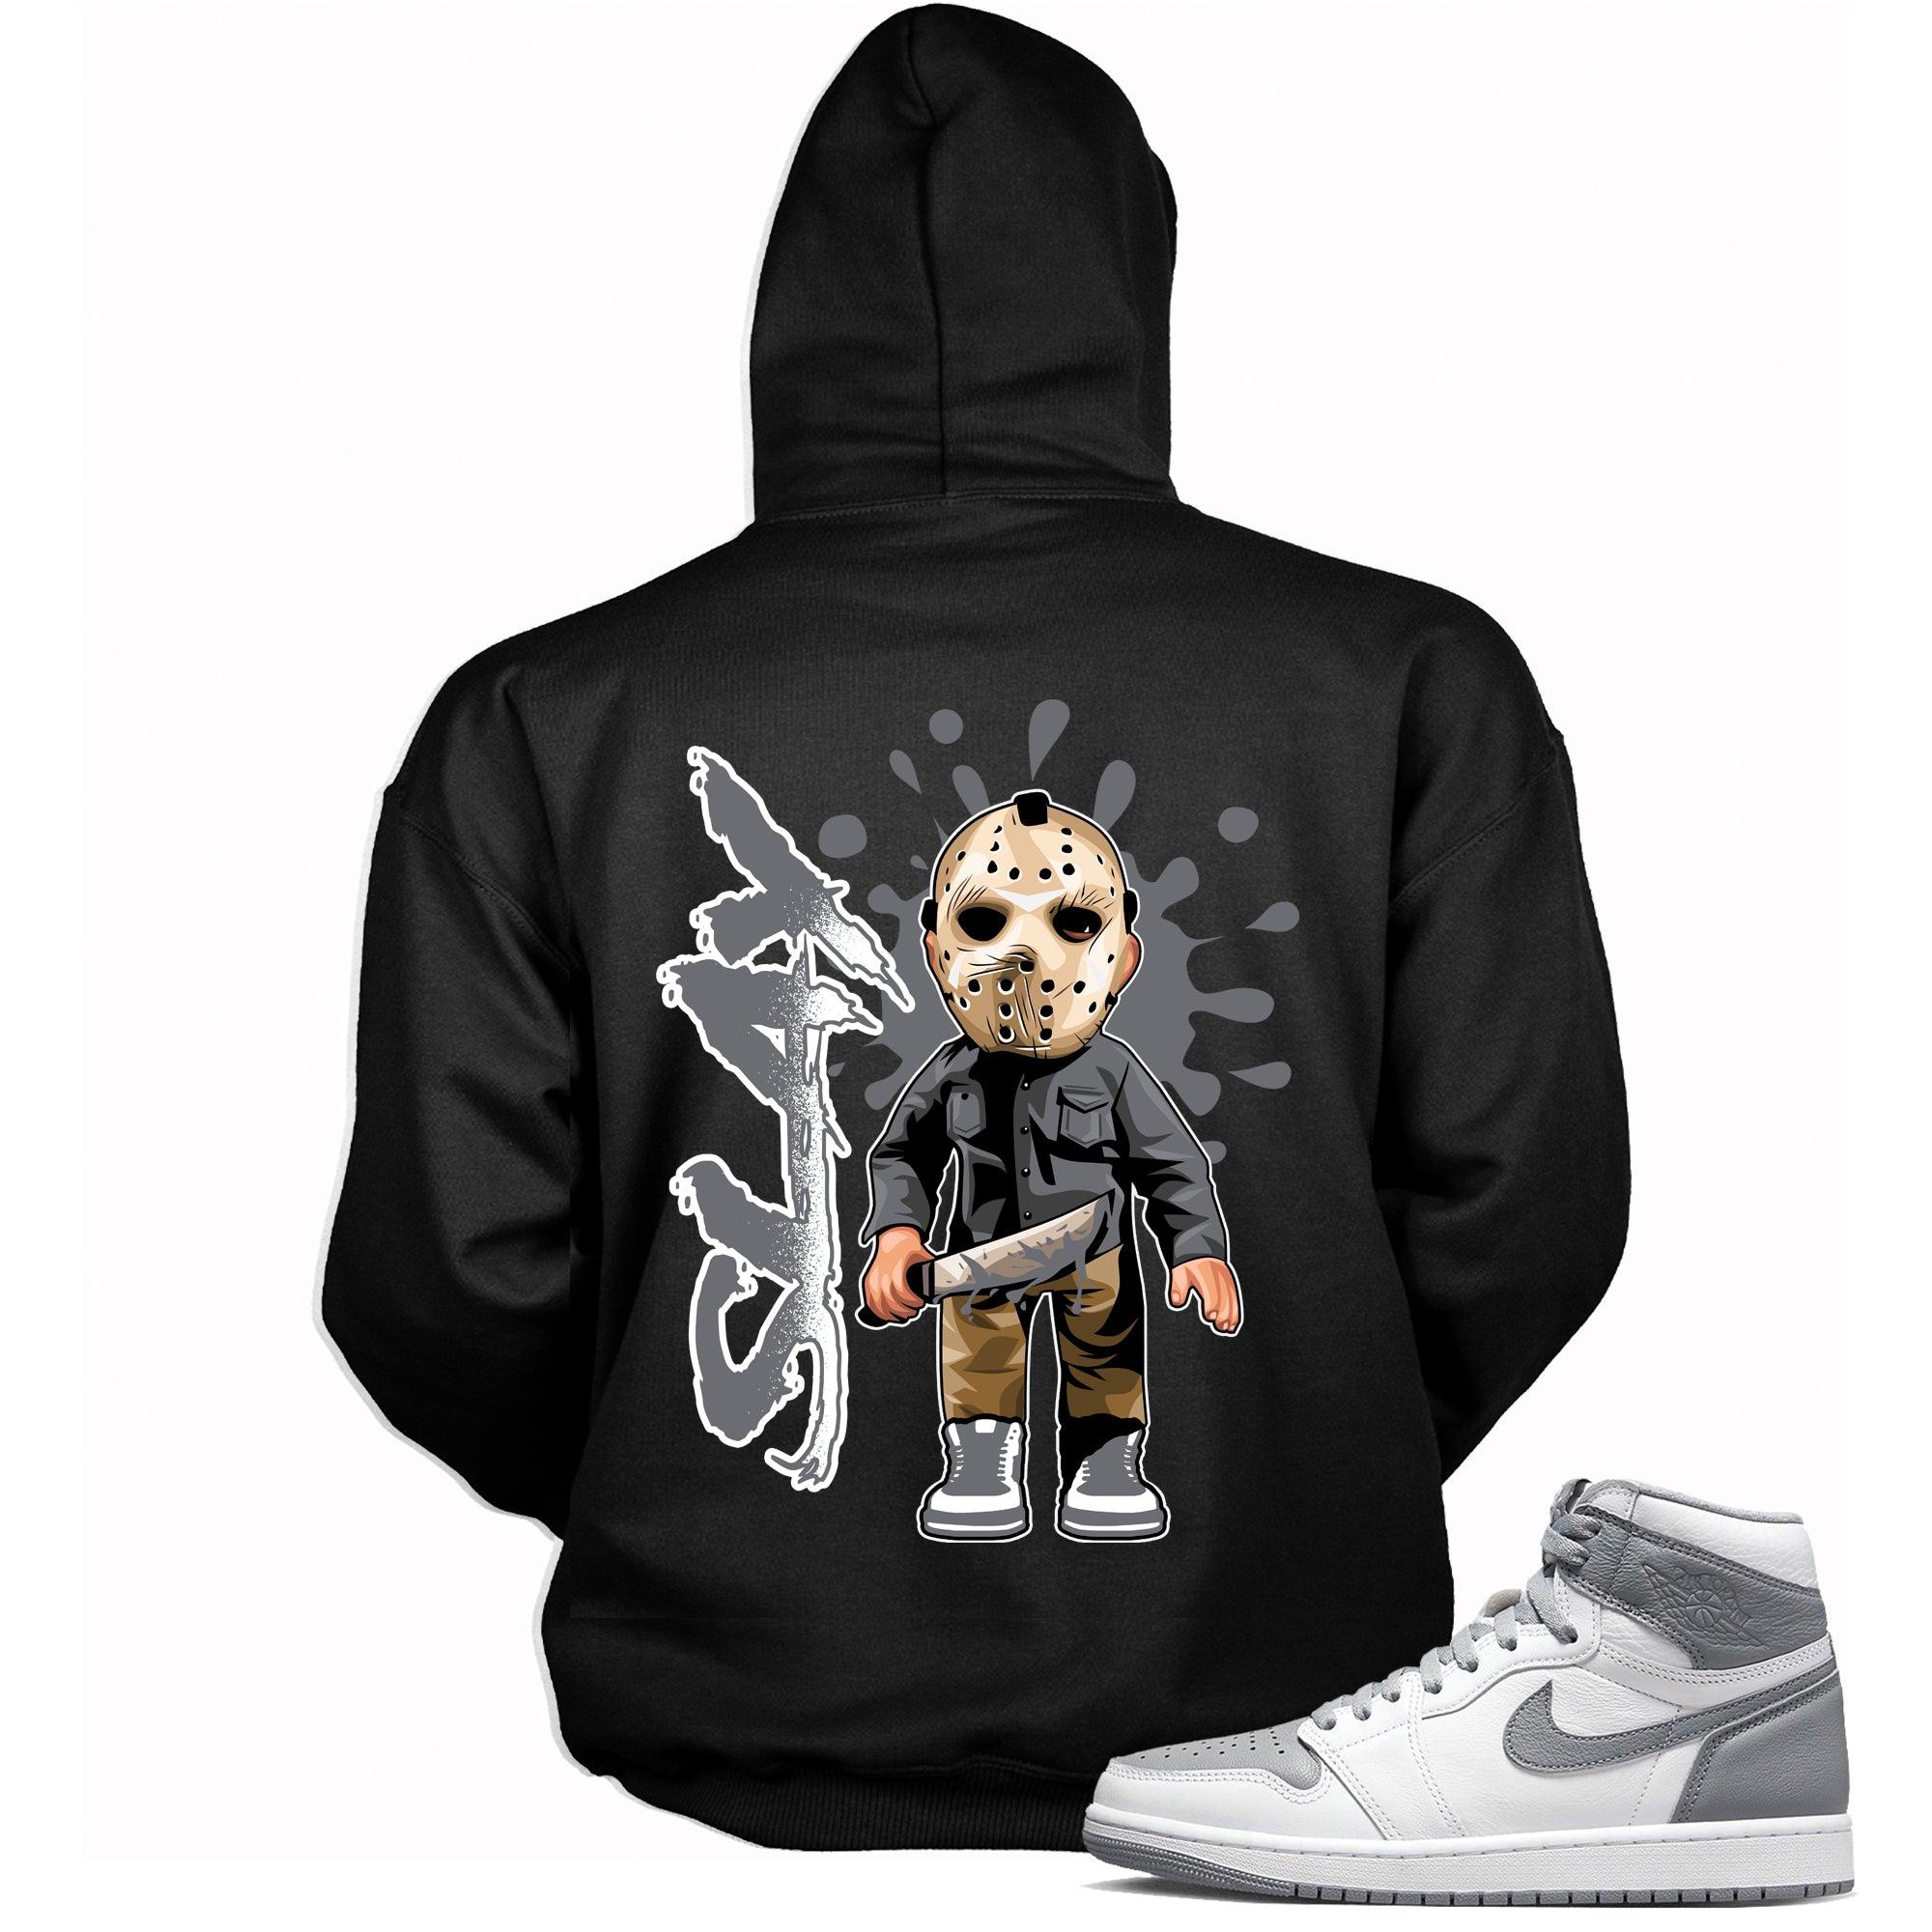 Slay Friday the 13th Hoodie for Jordan 1s photo